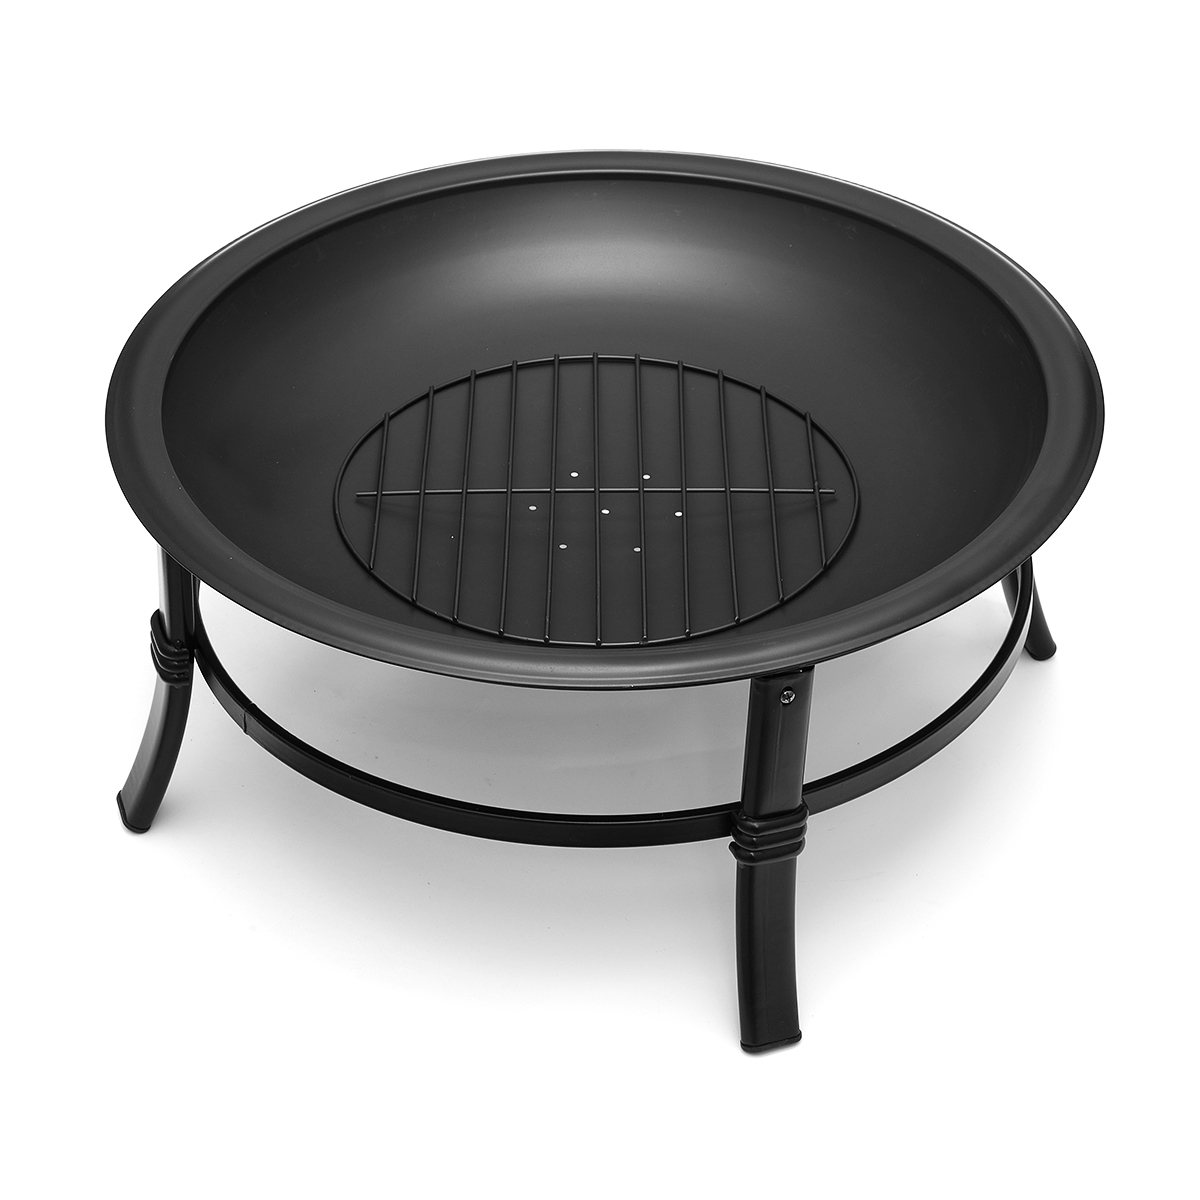 Kingso-26-inch-Fire-Pit-Wood-Burning--Small--Heavy-Duty-Steel-Firepit-with-Spark-Screen-Log-Grate-Po-1822387-6